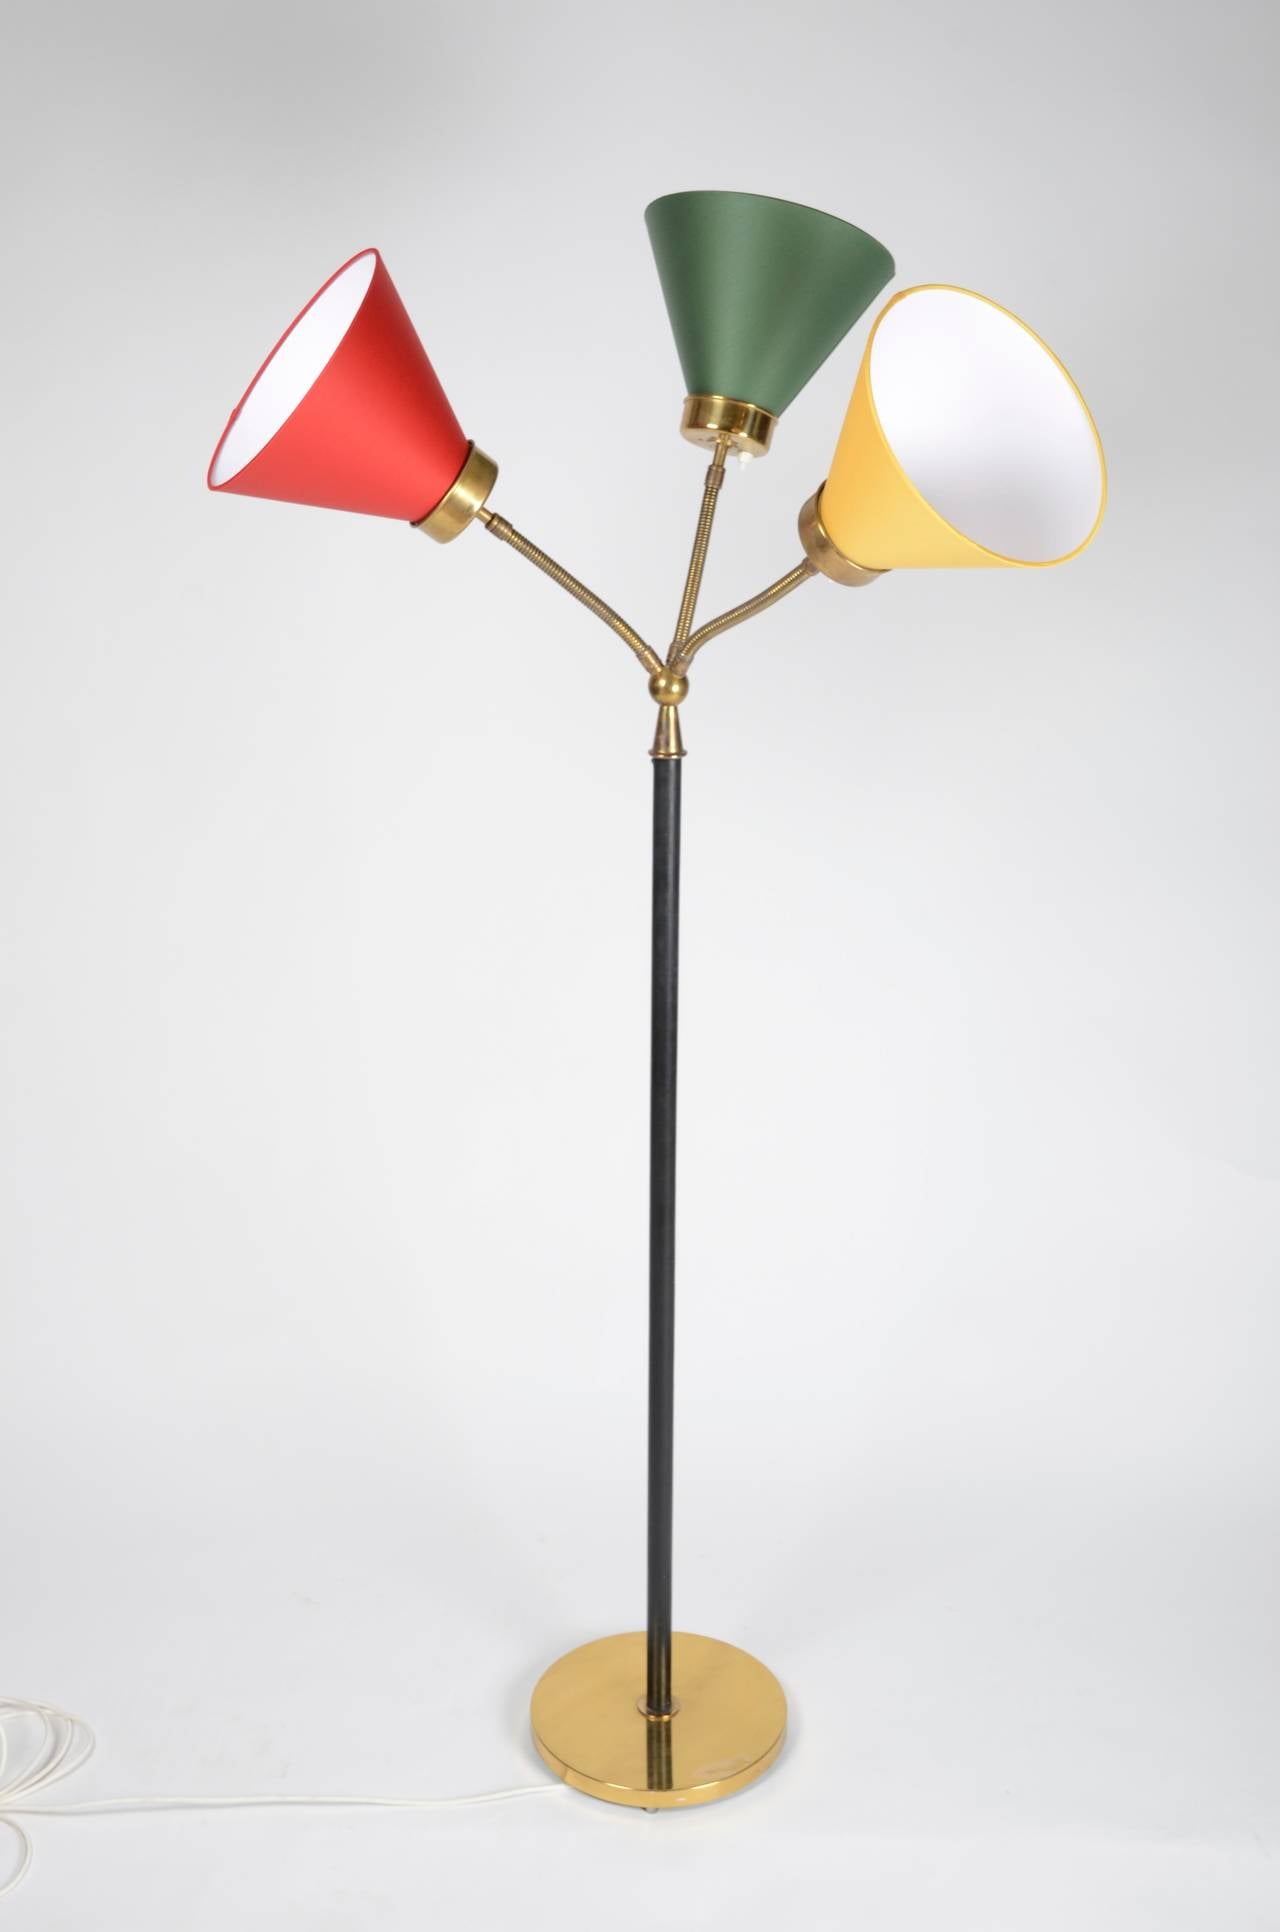 Floor lamp in brass and leather, model 2431, also called the San Fransisco-lamp, designed by Josef Frank in 1938 for Firma Svenskt Tenn. Shown at the Golden Gate exhibition in 1939. With three new lampshades, model 1842, Firma Svenskt Tenn.